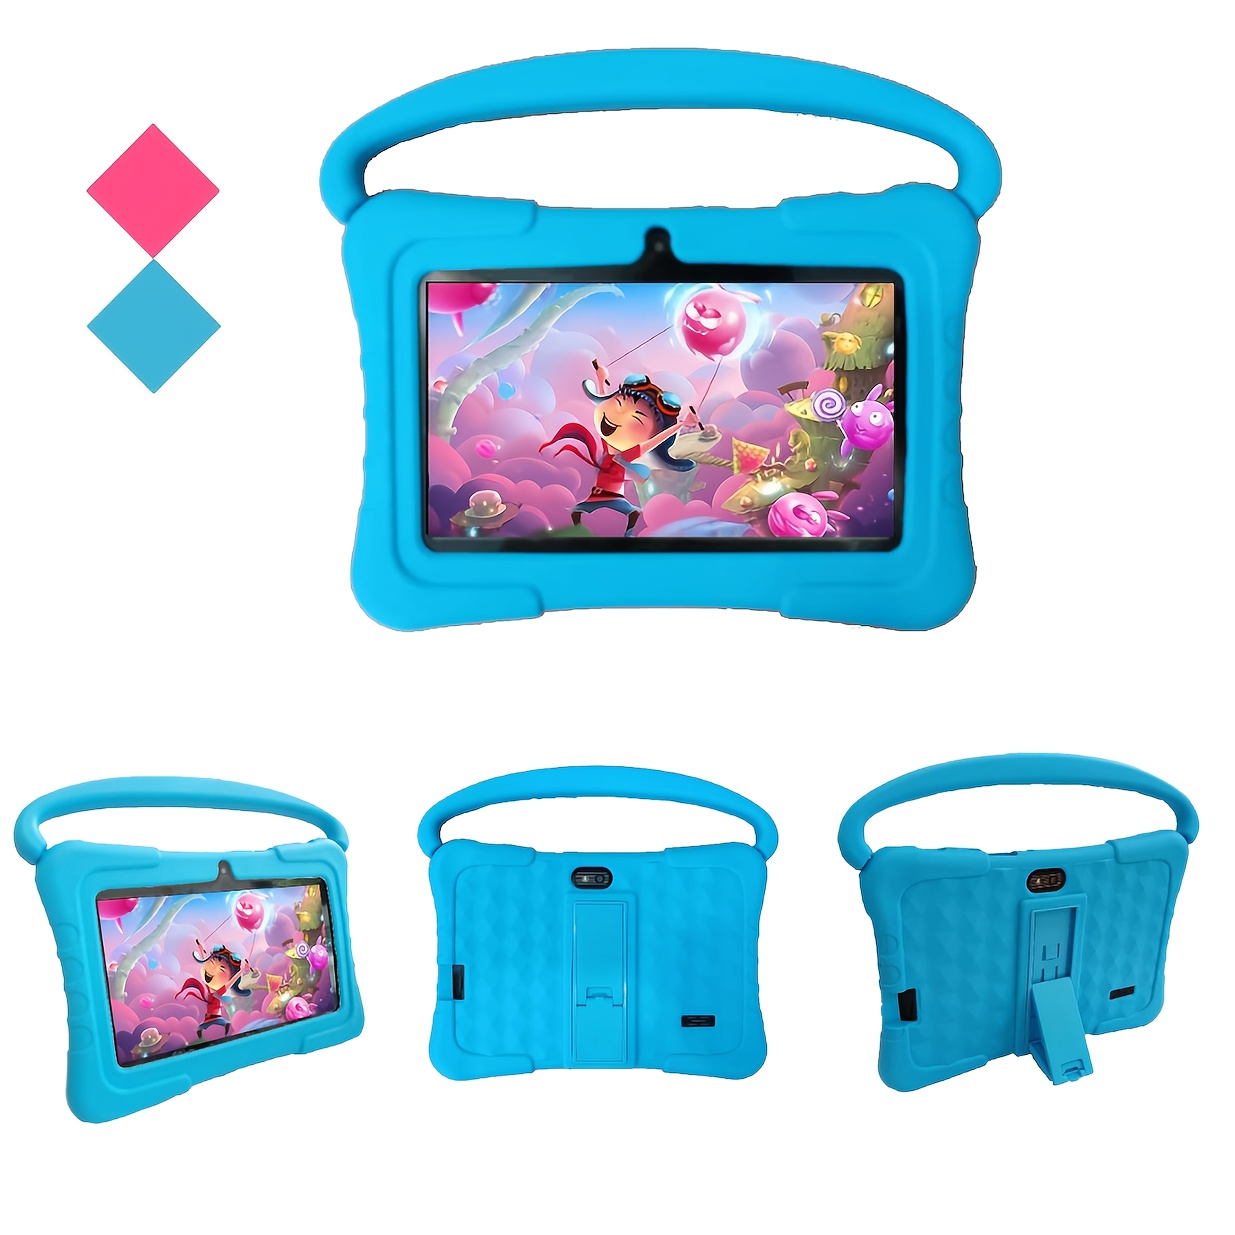 Tablet 7 inch with WiFi Dual Camera 32GB Parental Control Google Play Store   Netflix Android 10 Childrens Tablet for Toddlers Girls Boys